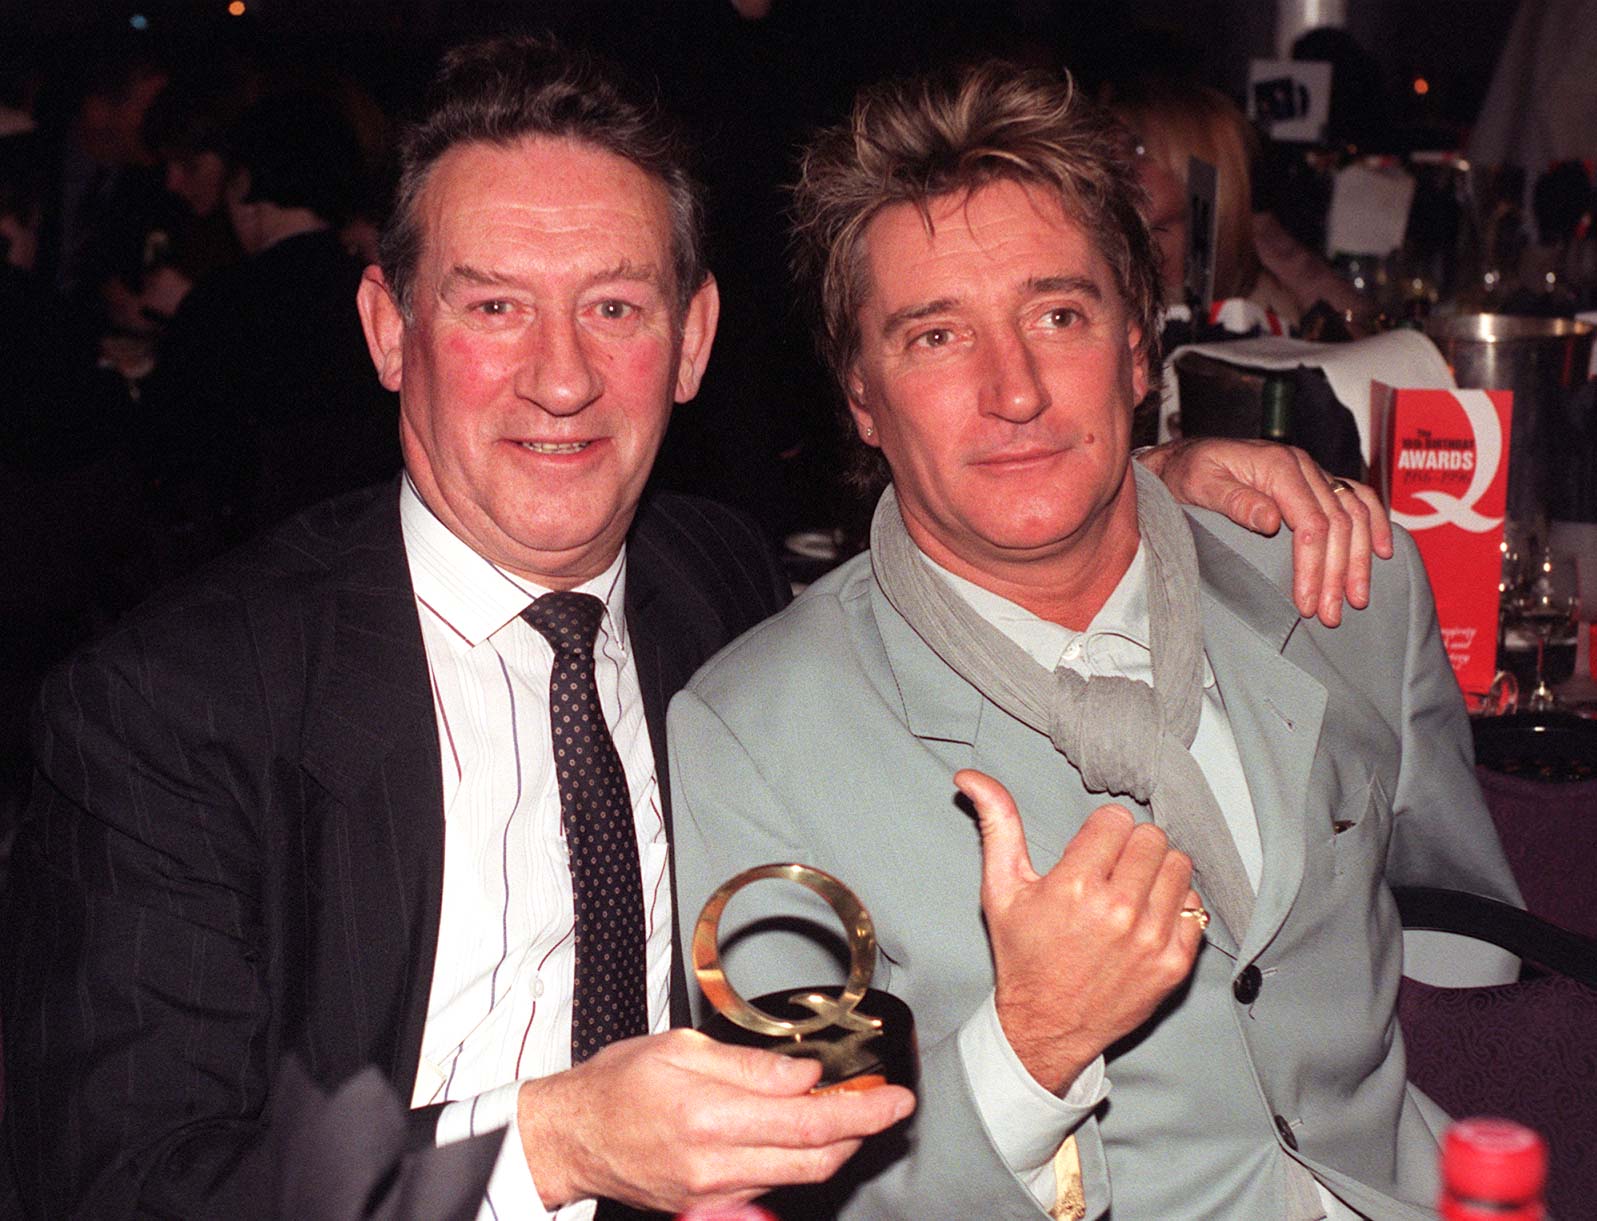 Rod Stewart and his older brother Donnie at the O Magazine Awards in London on November 8, 1996 | Source: Getty Images